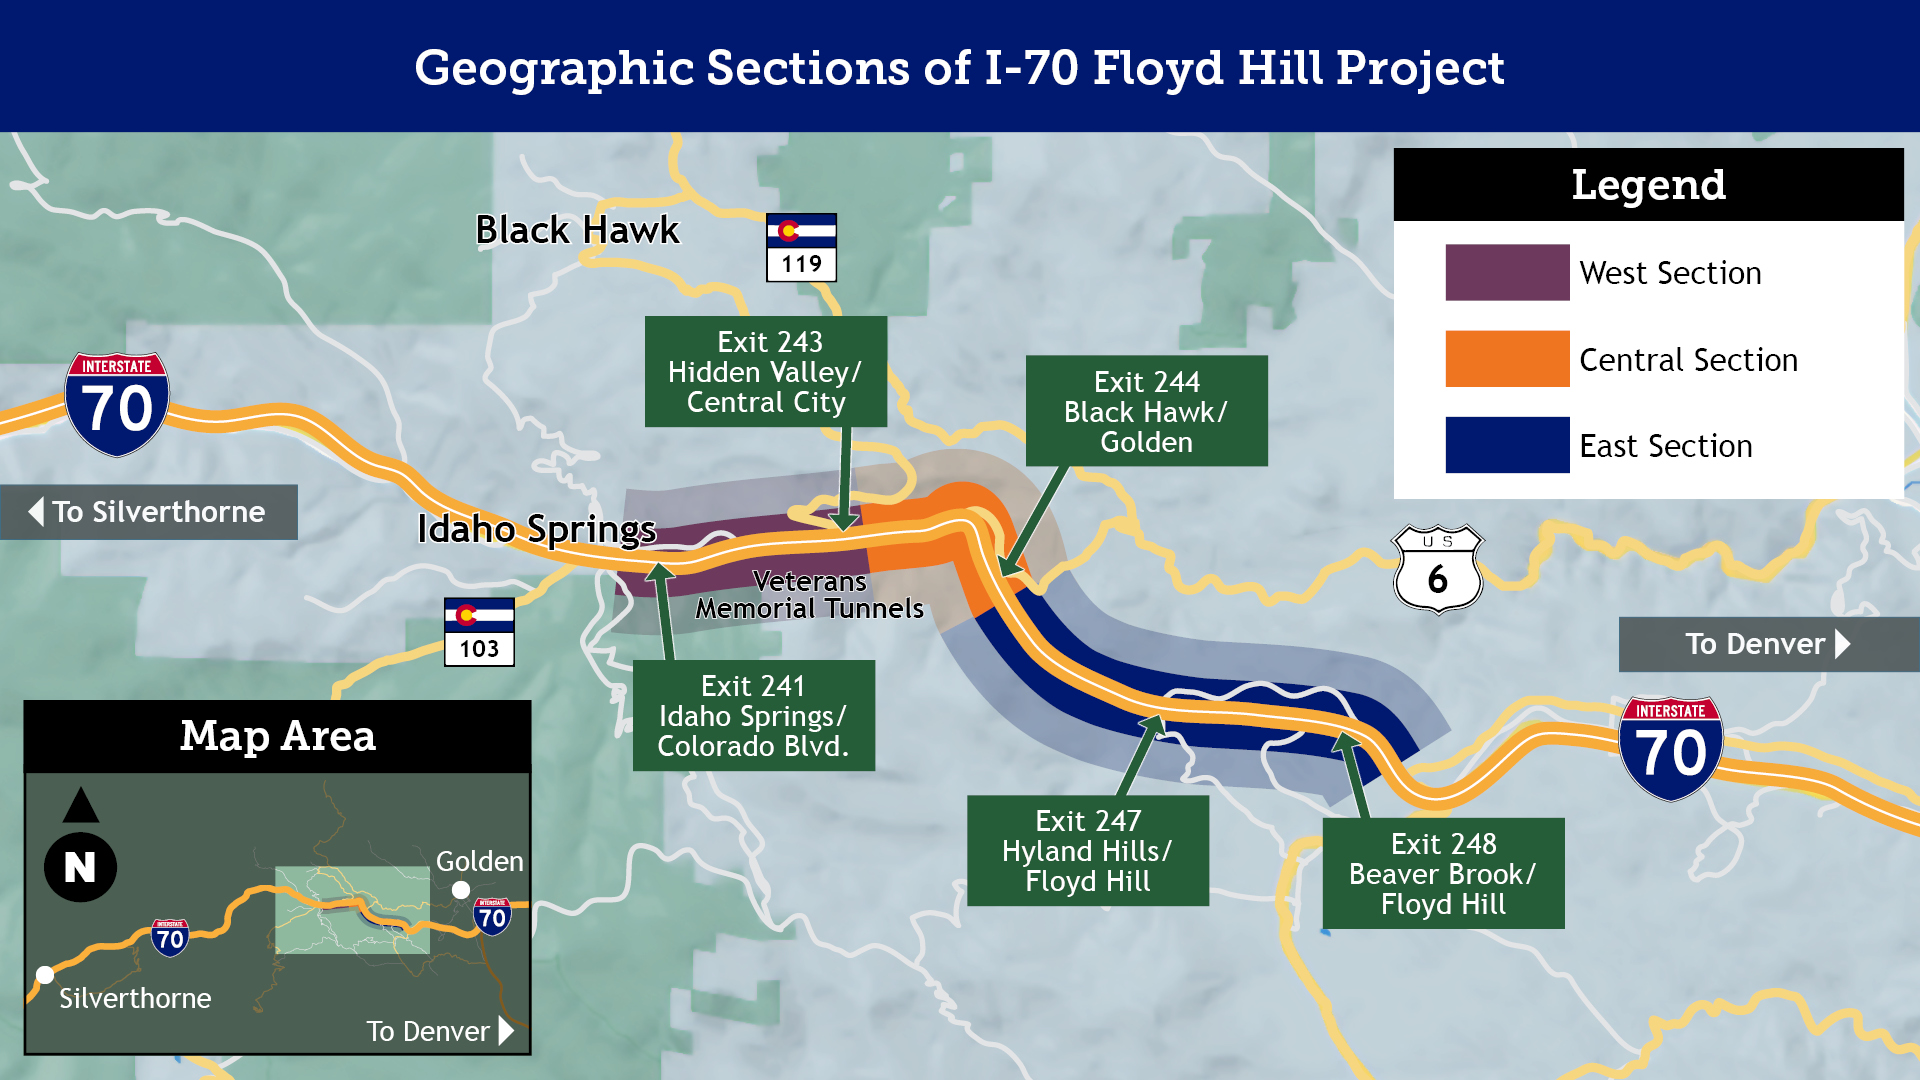 I-70 Floyd Hill Project Location Map.jpg detail image